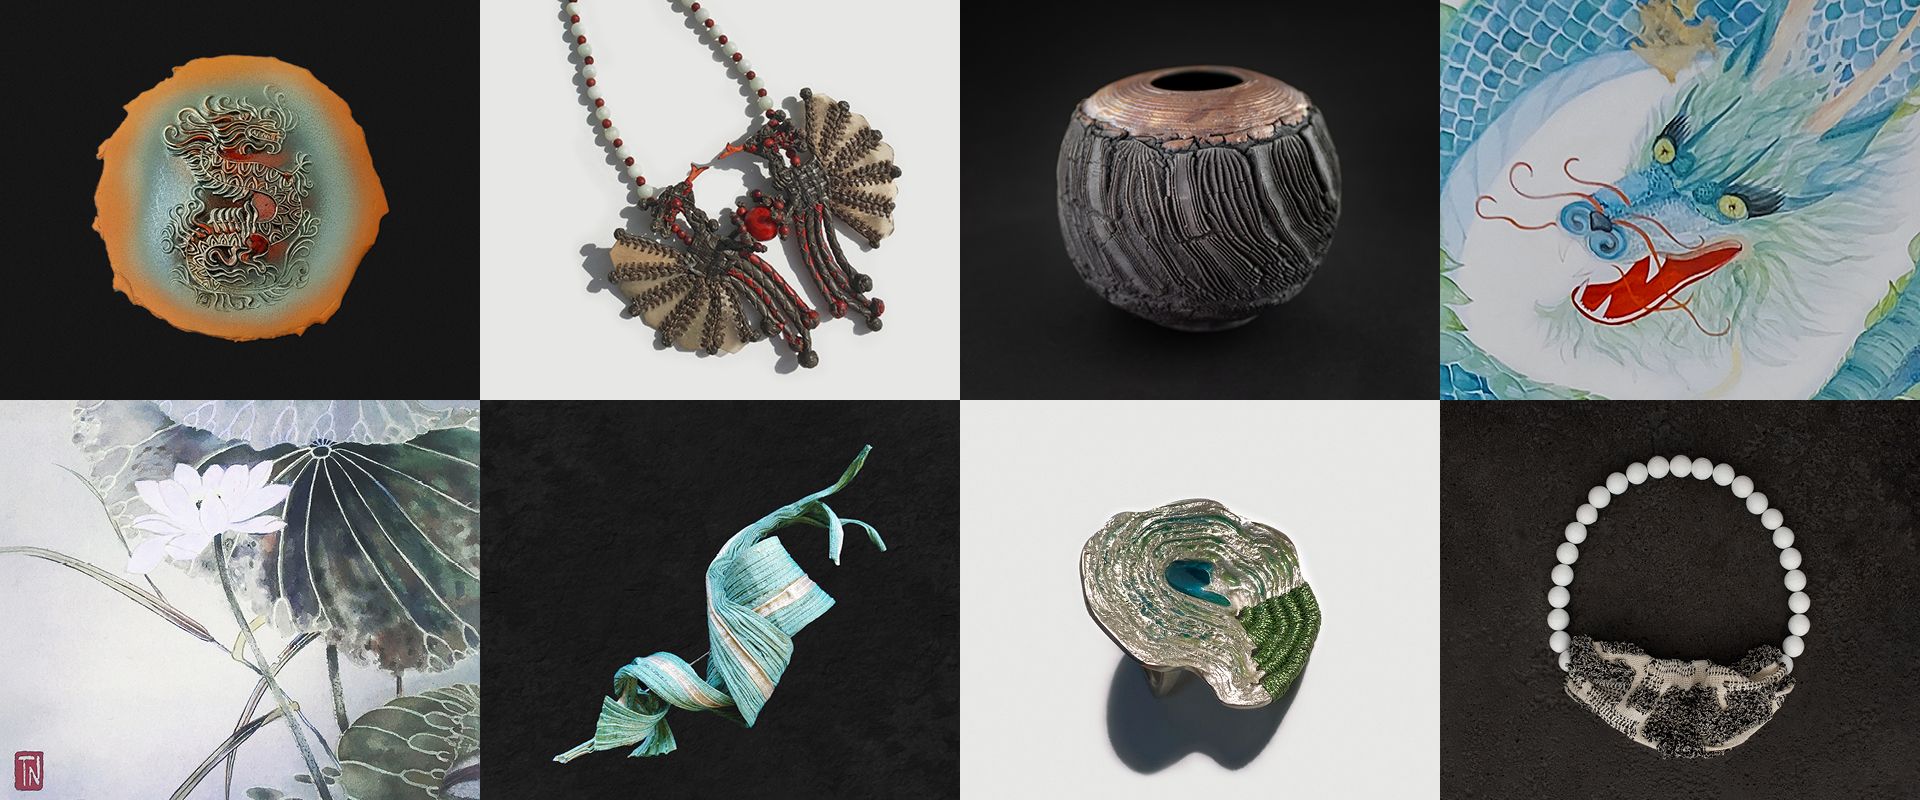 The Year of the Dragon

Contemporary arts and crafts exhibition and fair | Spring edition